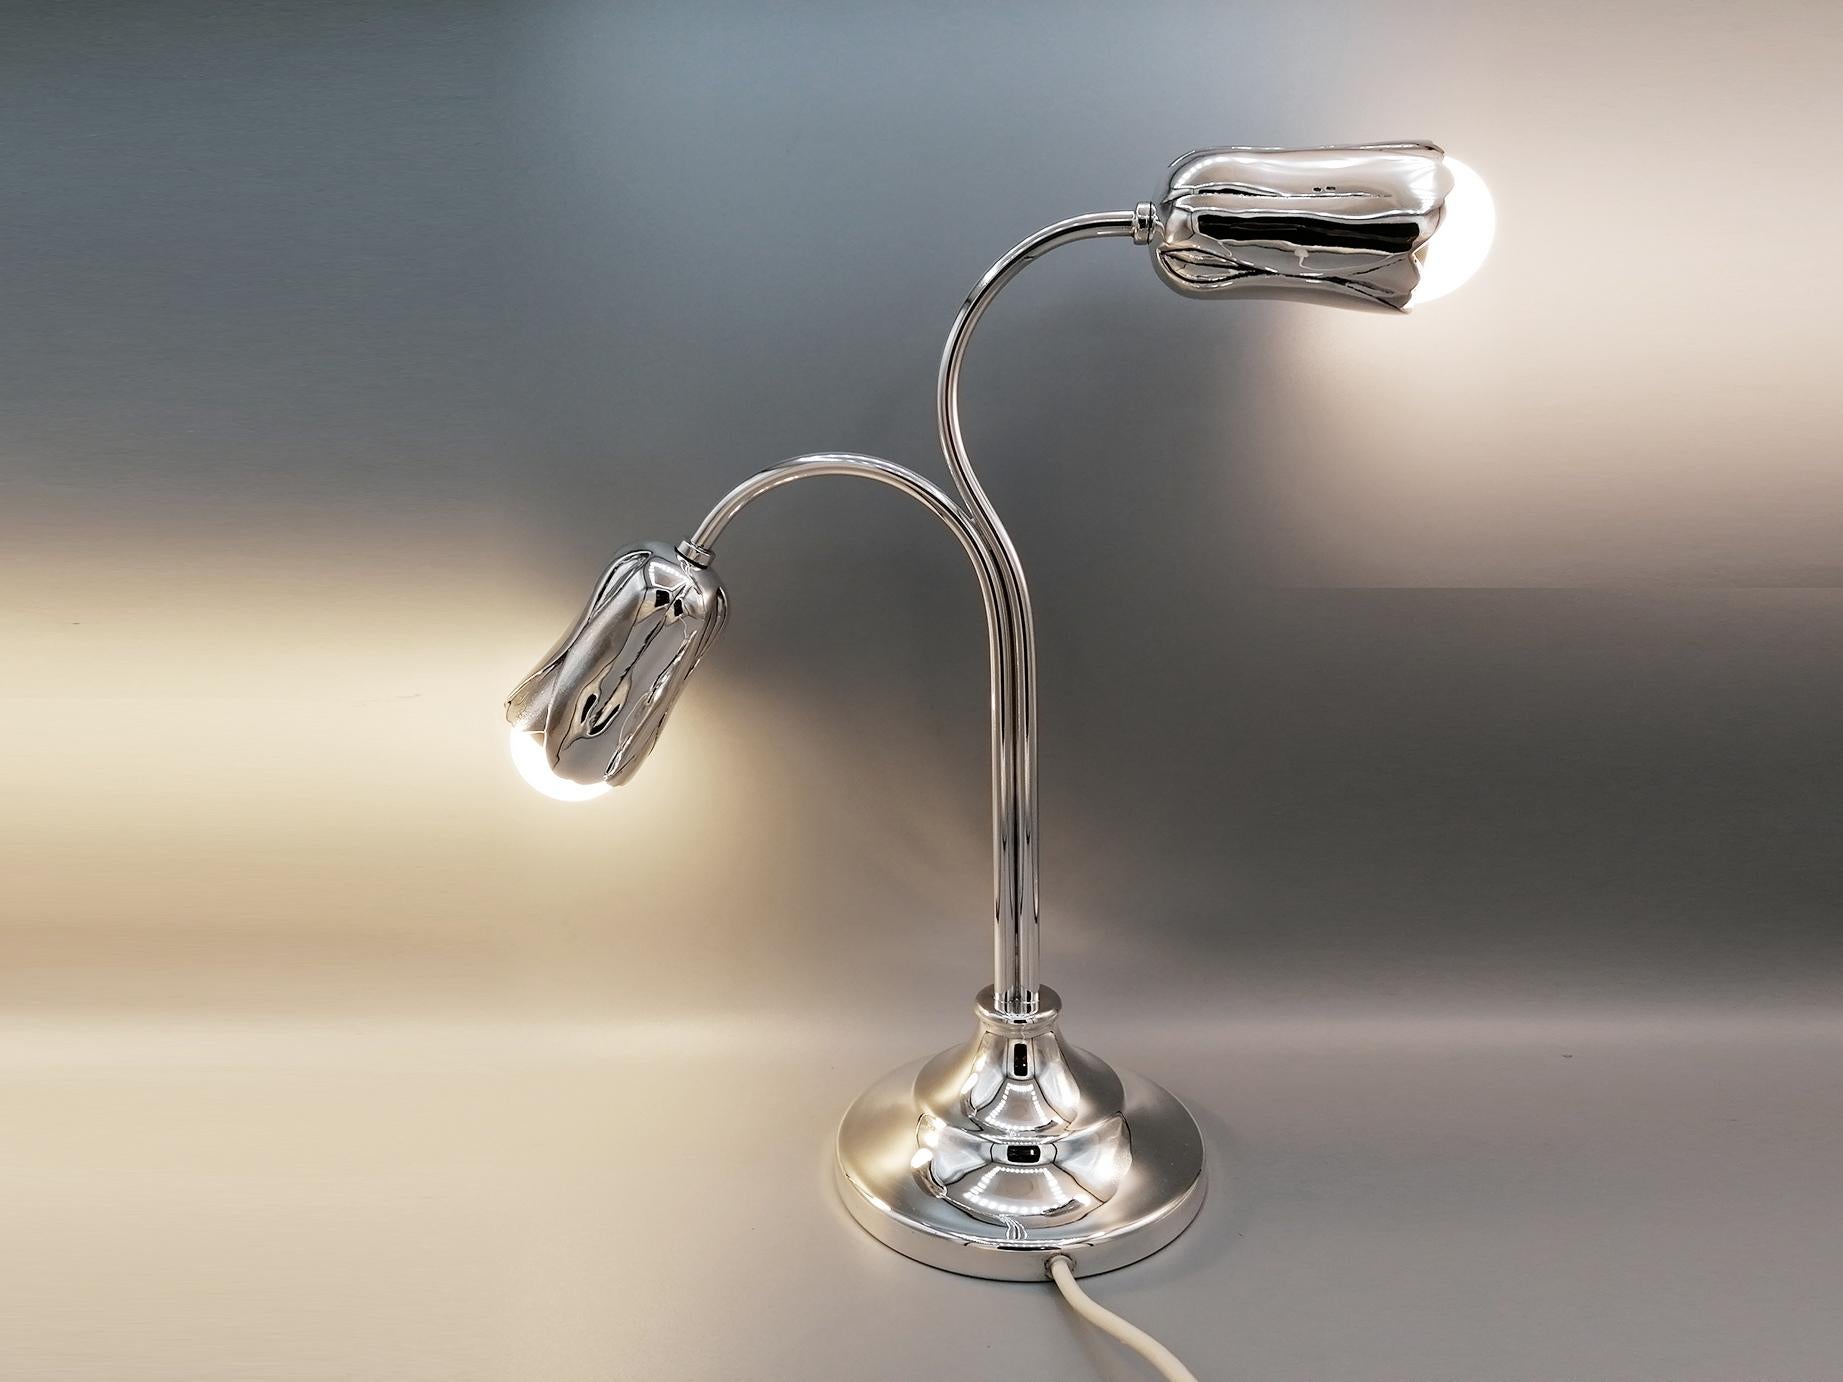 Two light solid sterling silver lamp.
The base is round while the stem has a double empty tubes where the electric wire passes.
The lamp holders are in the shape of a tulip flowers in fusion and with a chisel finish.
Italian silverware, already with